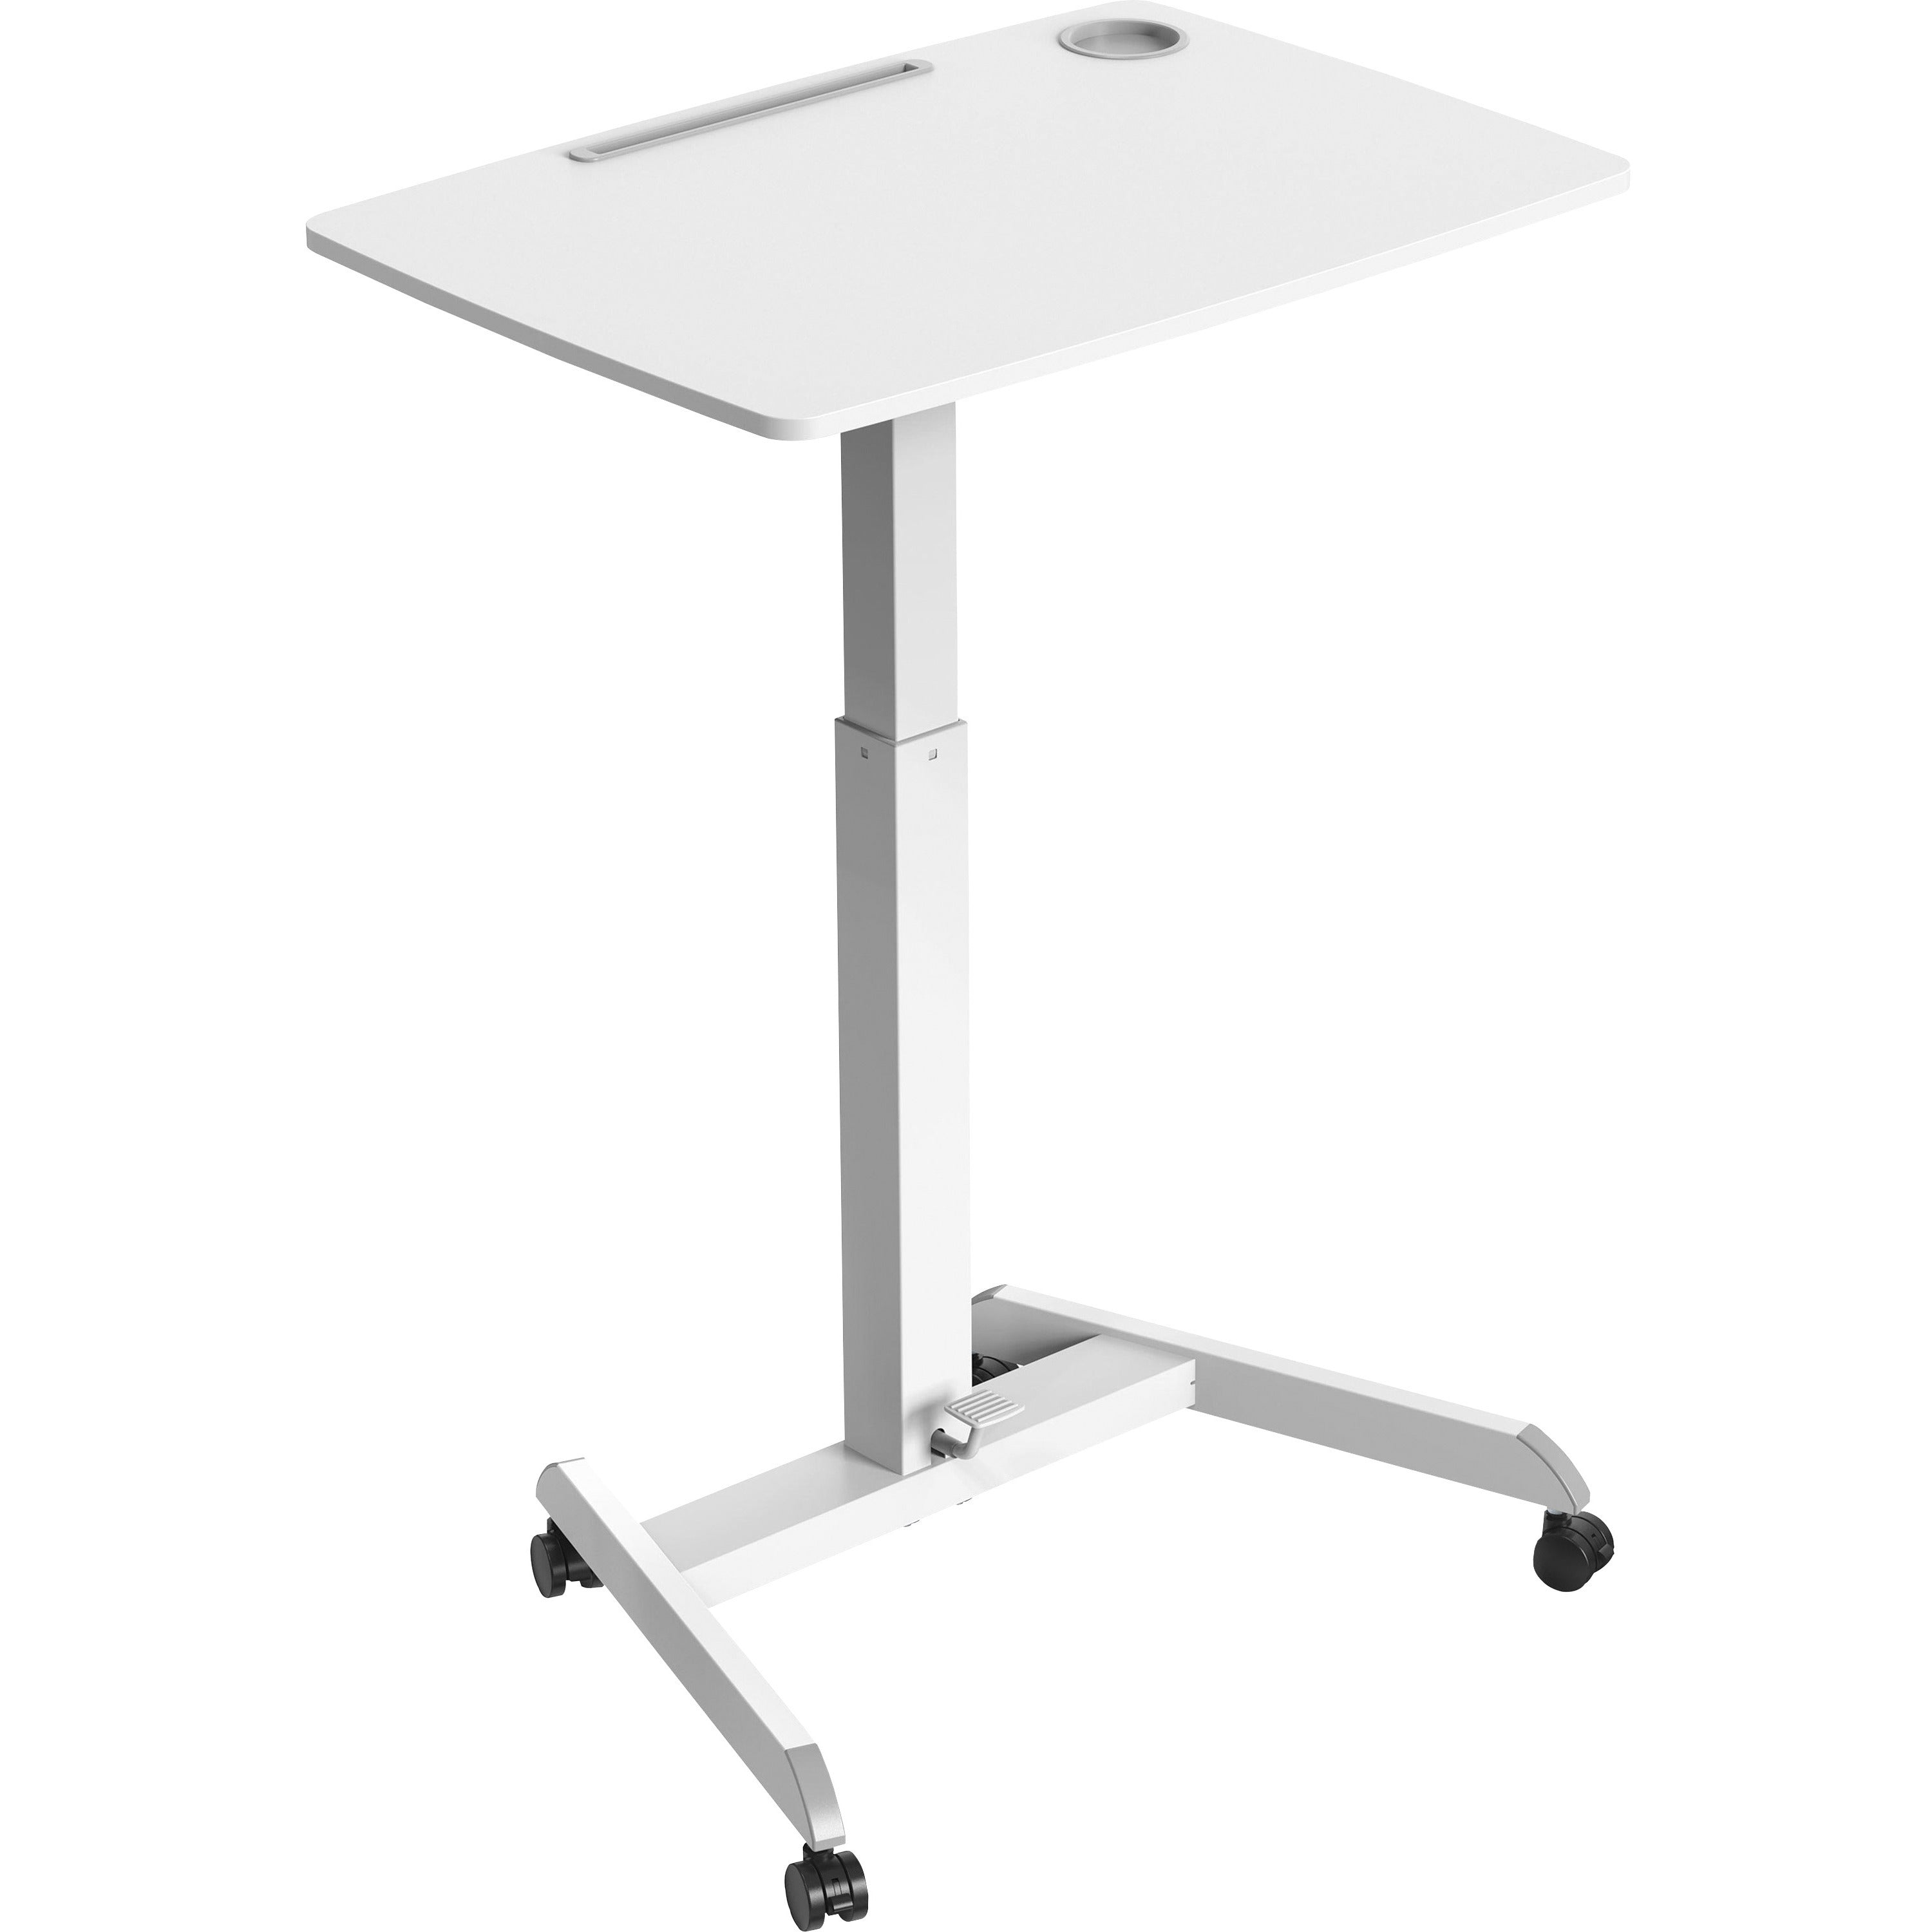 kantek-adjustable-height-mobile-sit-stand-desk-adjustable-height-22-table-top-length-x-3150-table-top-width-49-height-assembly-required-white-melamine-top-material-1-each_ktksts330w - 1